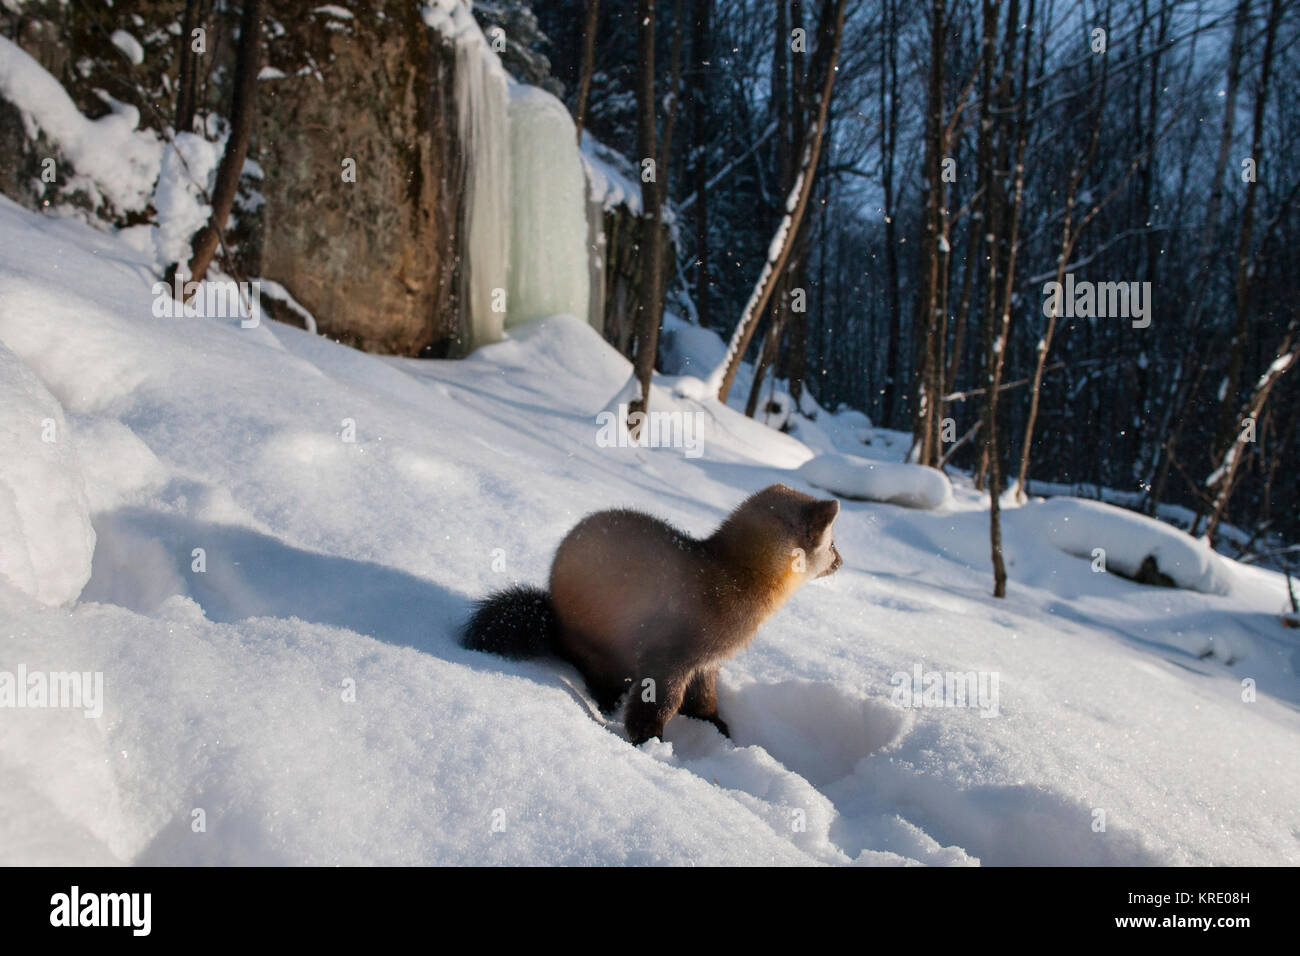 MAYNOOTH, ONTARIO, CANADA - December 18, 2017: A marten (Martes americana), part of the Weasel family / Mustelidae forages for food. Stock Photo